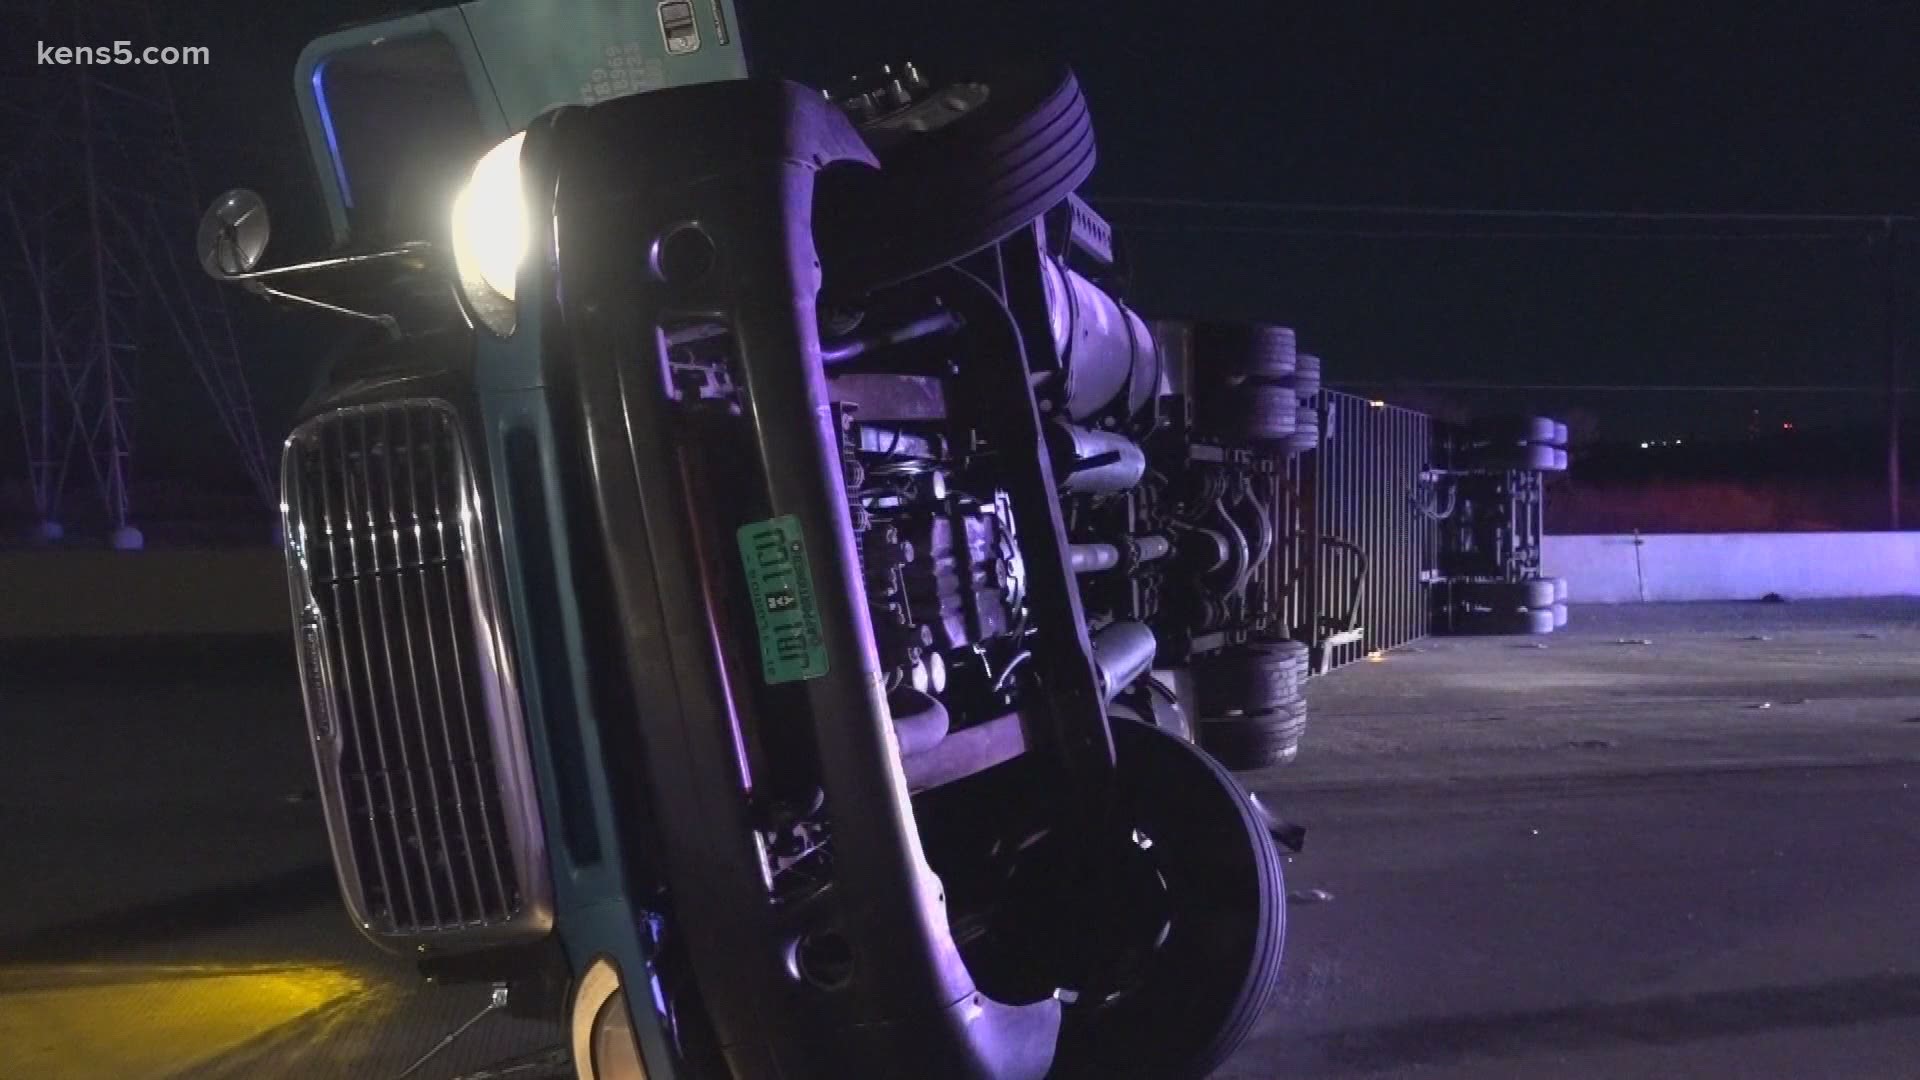 The driver of an 18-wheeler carrying 10,000 pounds of tires lost control while driving along I-10 this morning which resulted in the truck flipping onto its side.